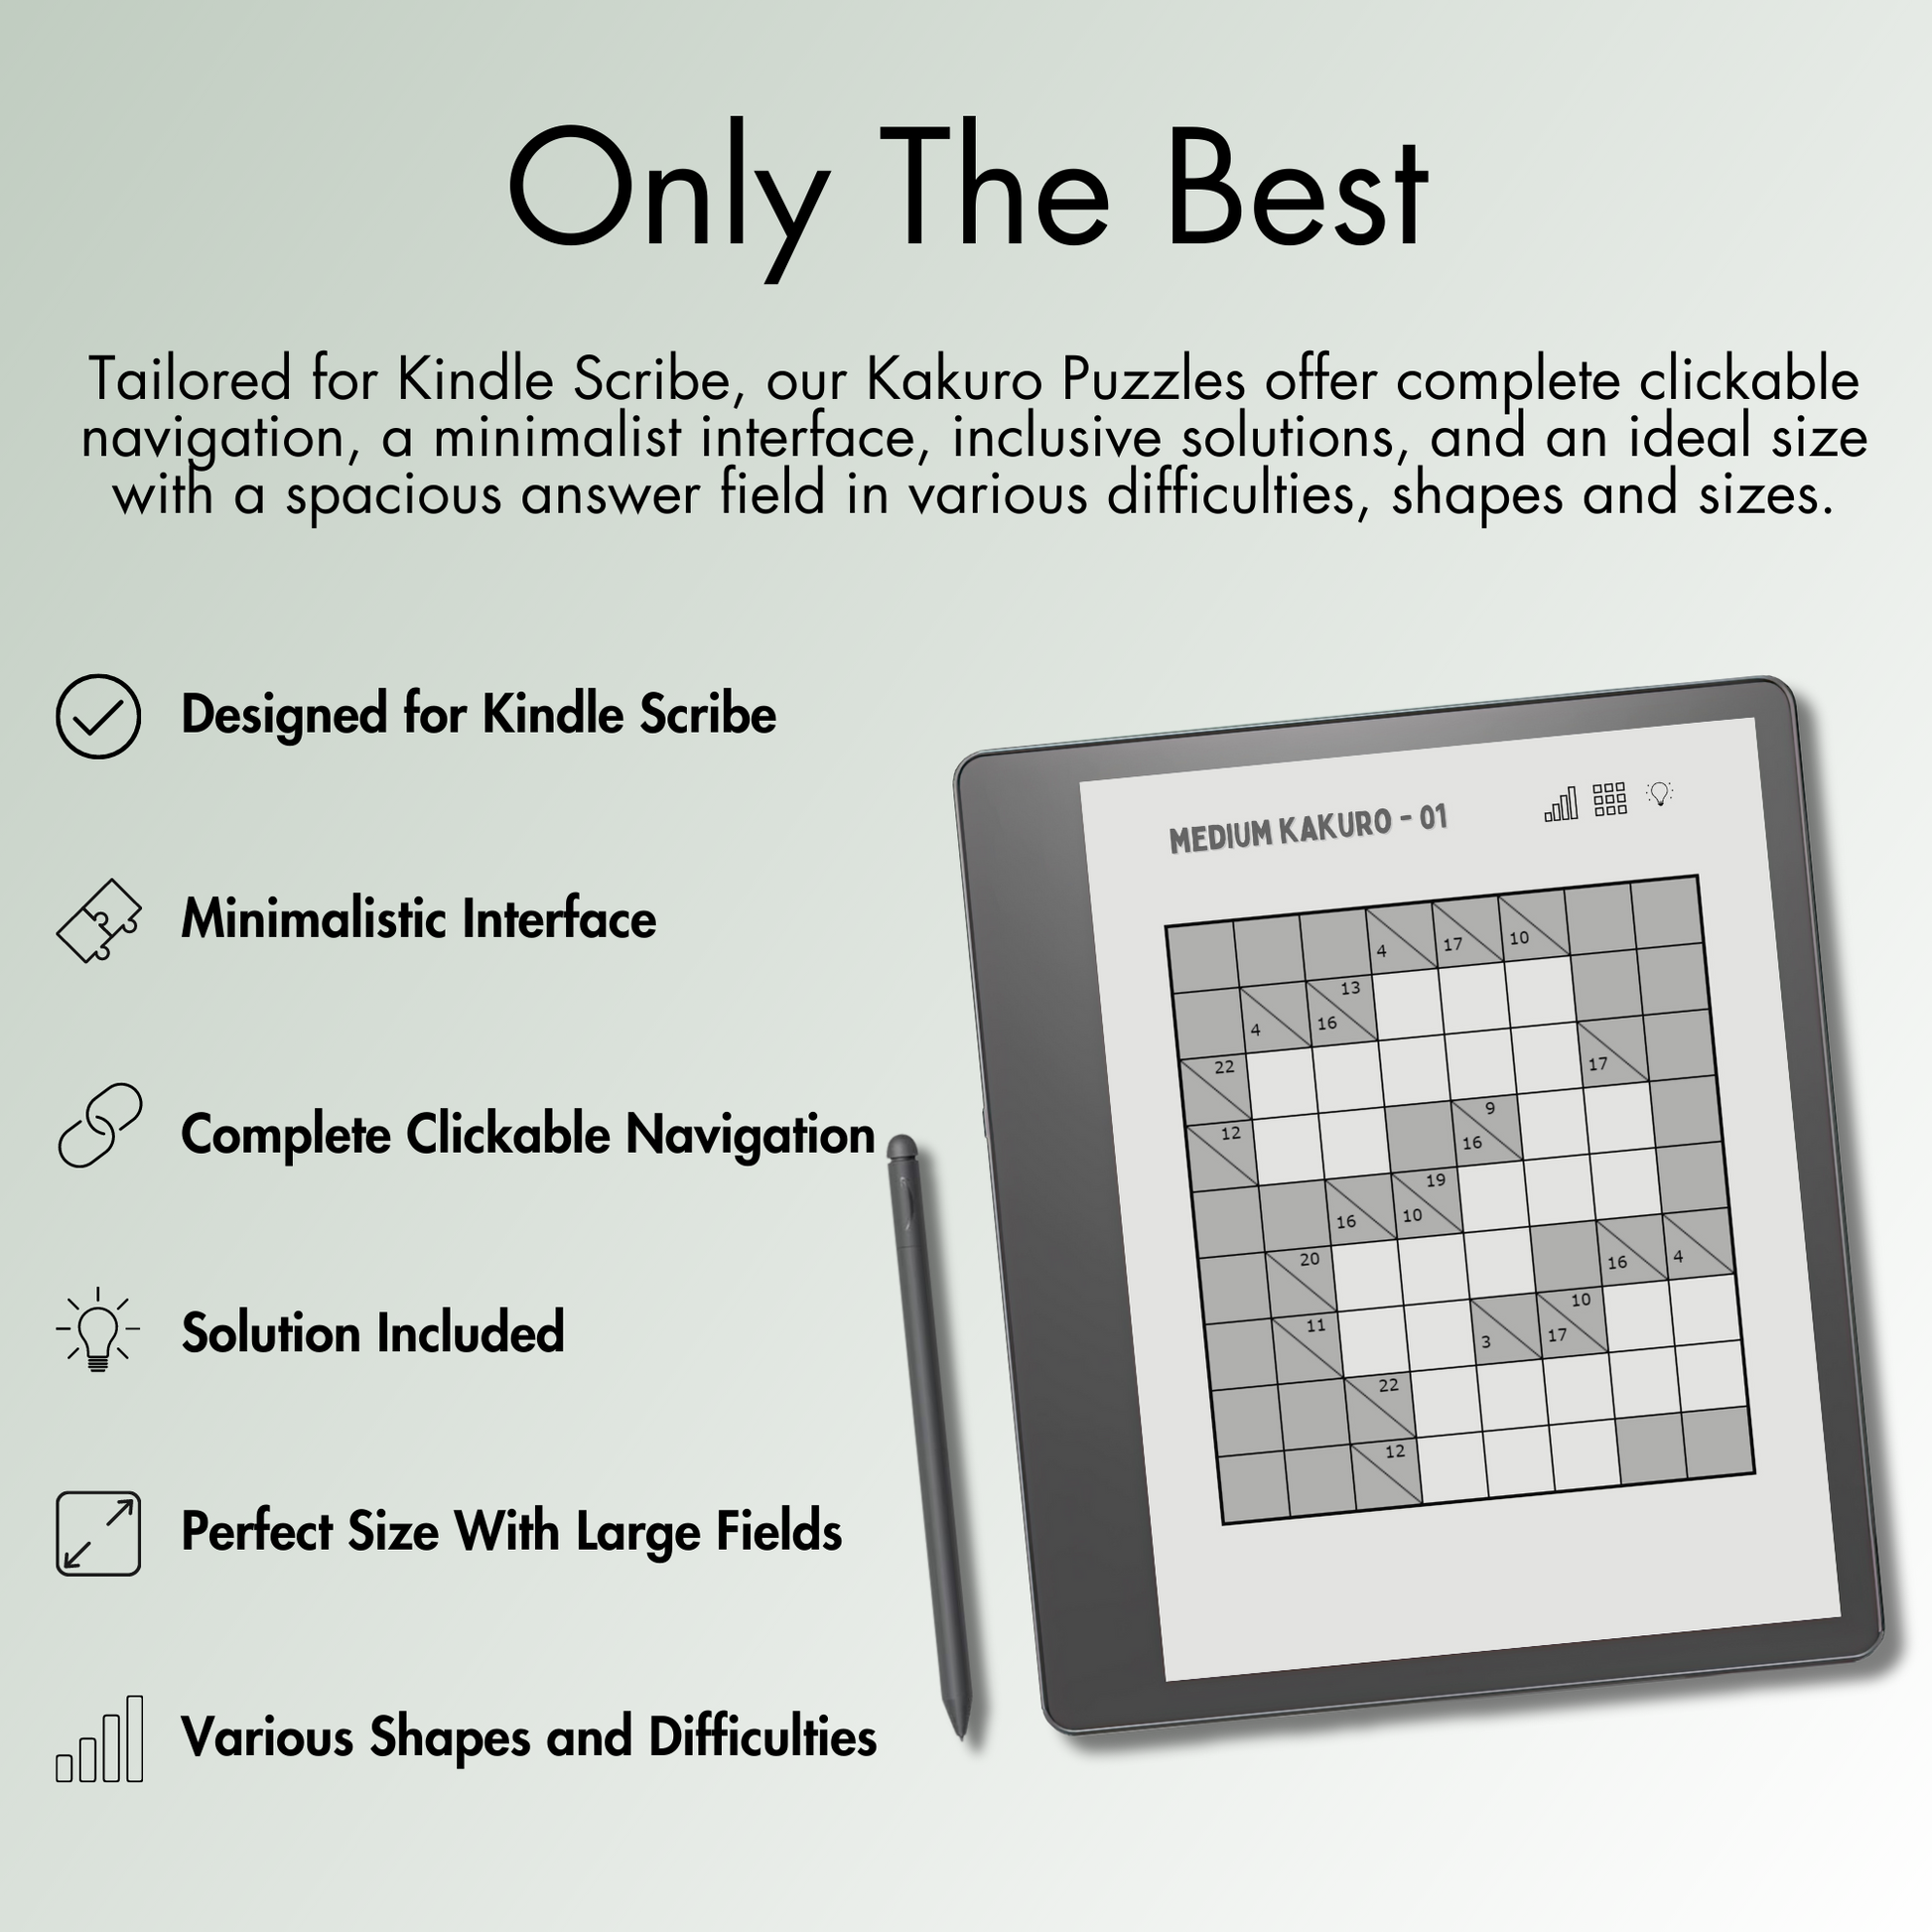 Our Kakuro Puzzles offer complete clickable navigation, a minimalist interface, inclusive solutions, and an ideal size with a spacious answer field for Kindle Scribe E-Ink screen.